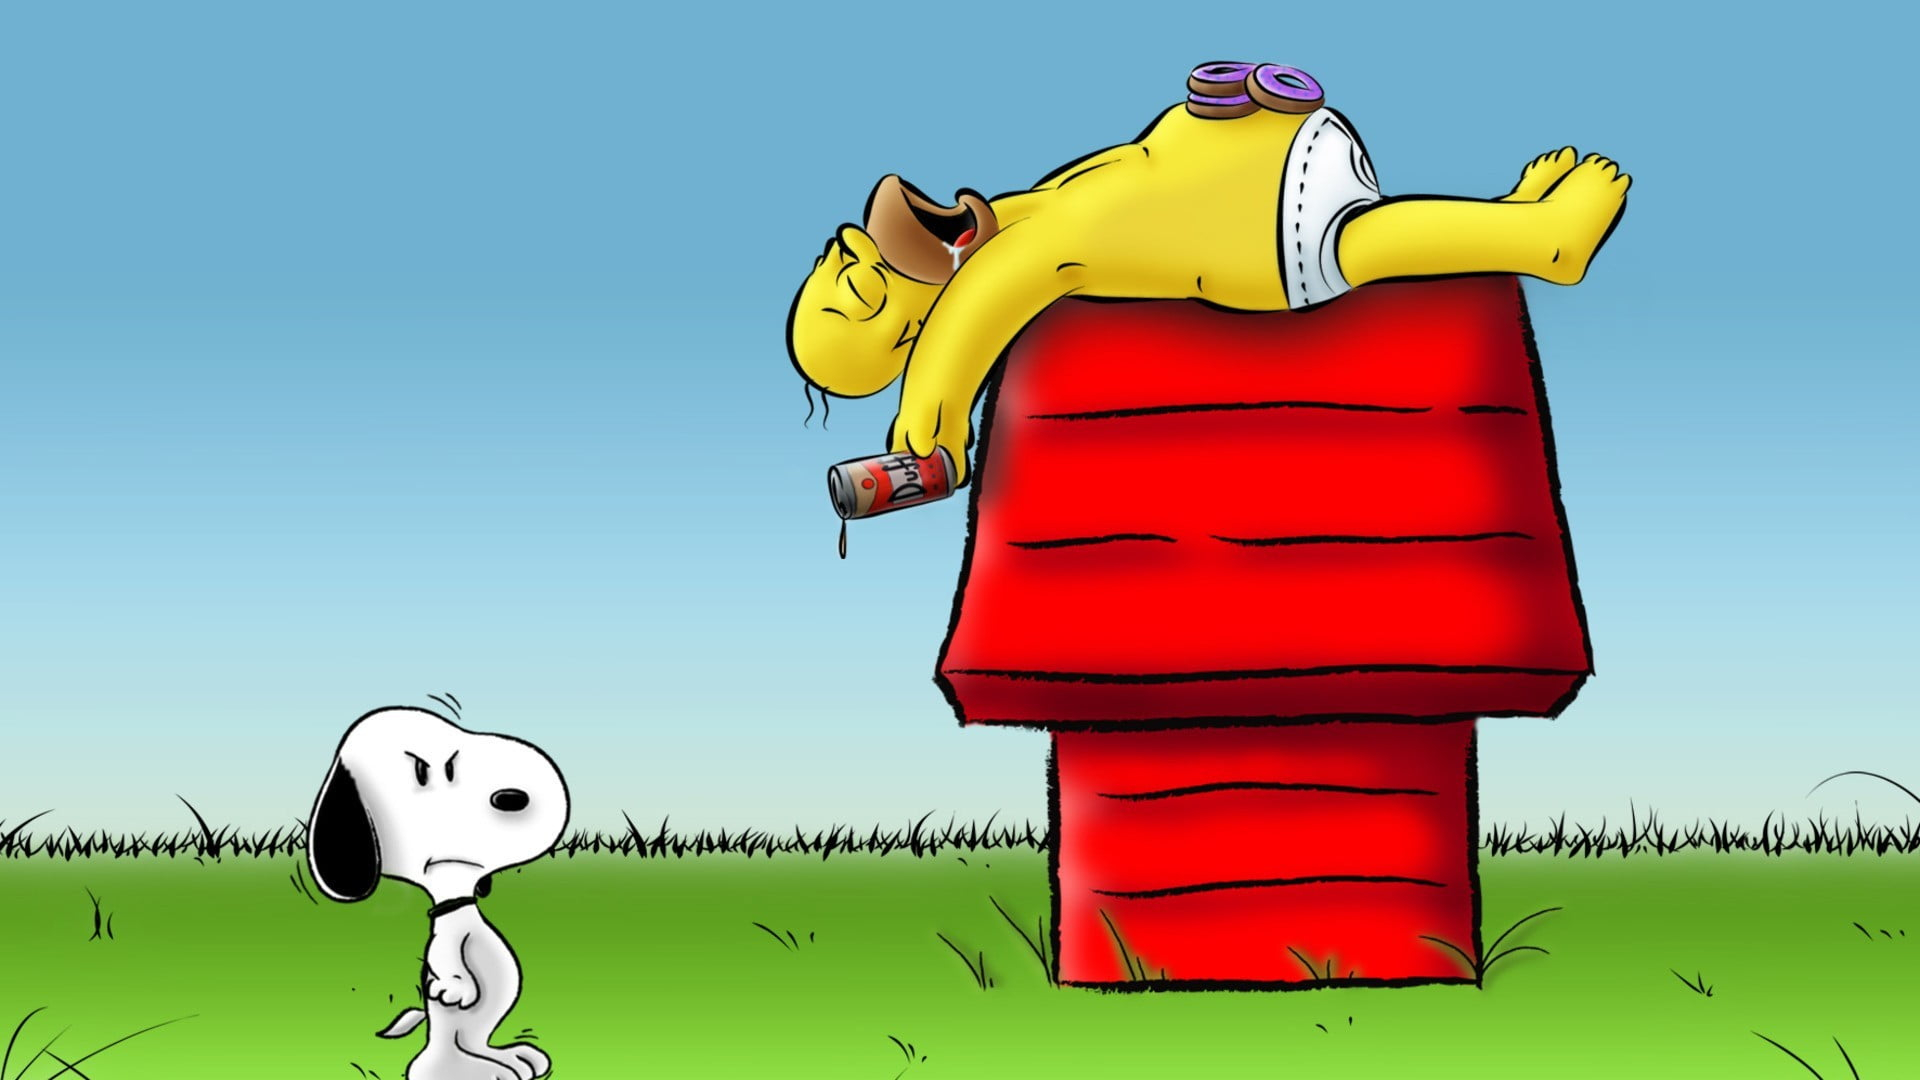 1920x1080 Snoopy and Homer Simpson clip-art, The Simpsons, Snoopy, Homer Simpson, cartoon HD wallpaper